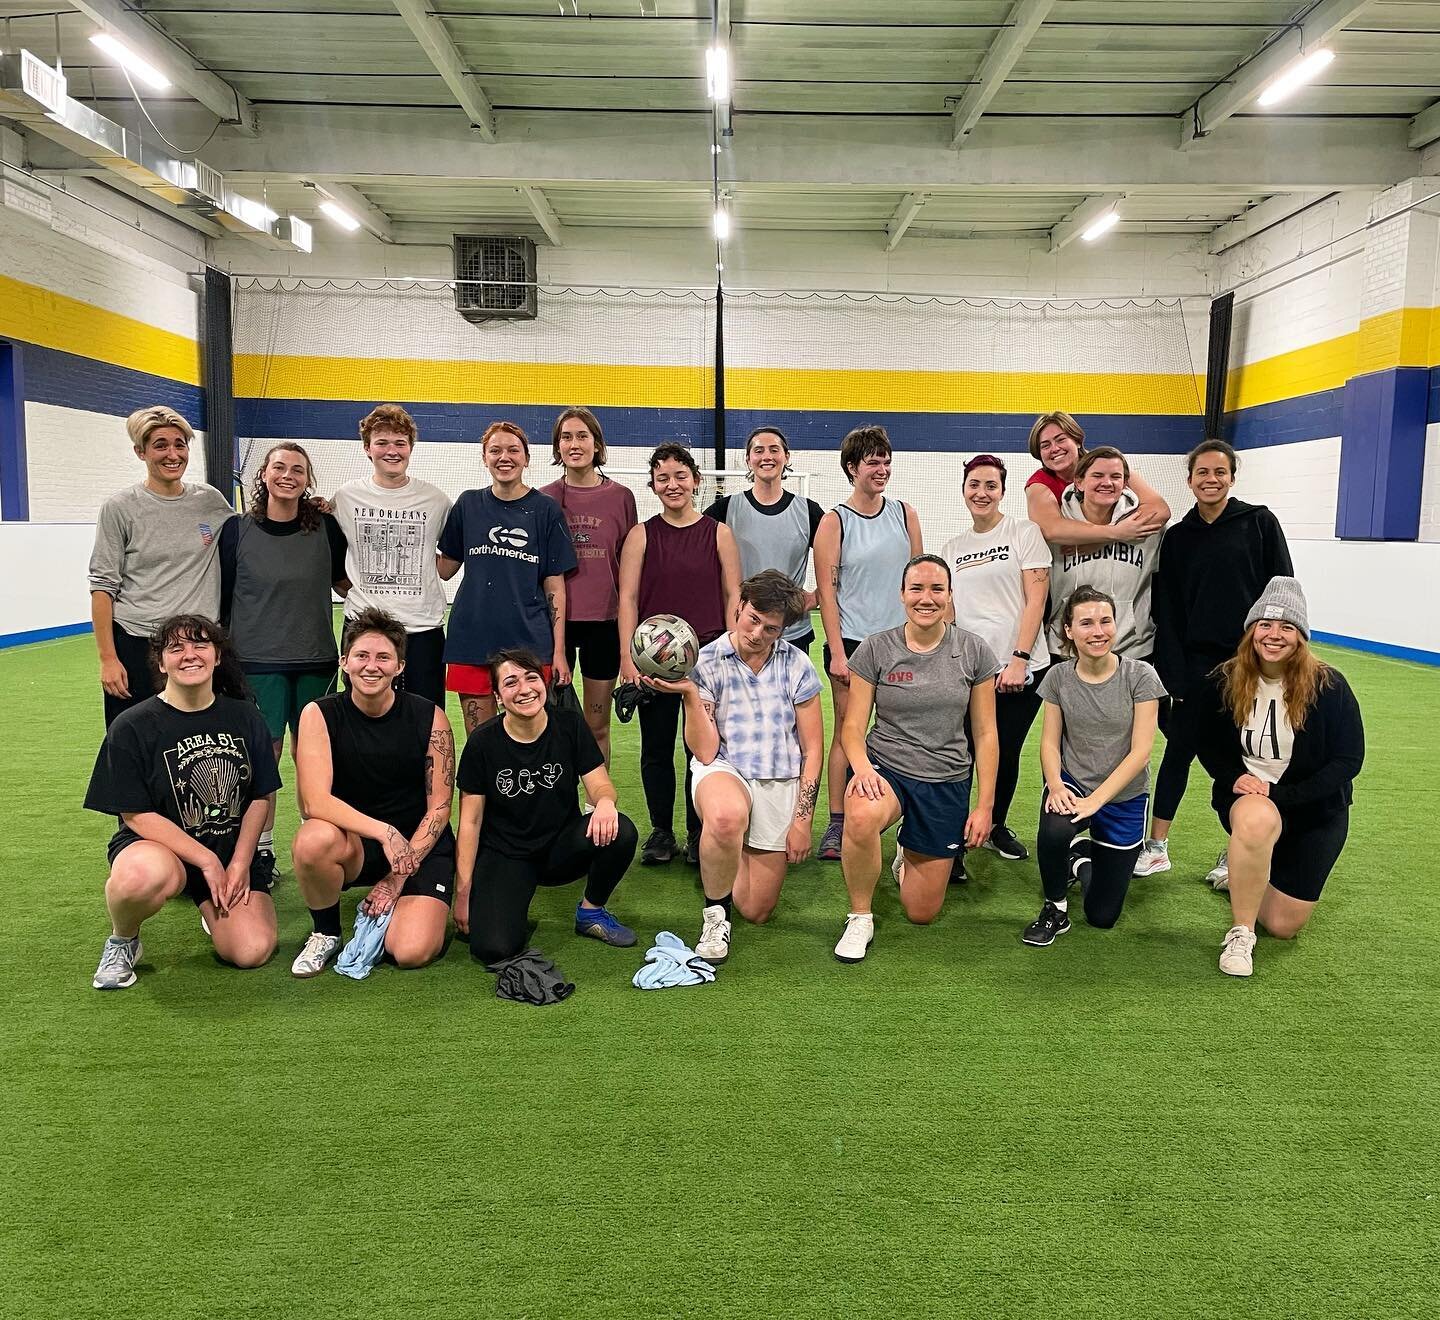 Another great indoor week with this queer crew 🌈⚽️

DM for your tag! 

#QueerSoccer #NYCSoccer #NYCSoccerLeague #GaySoccer #NYCQueerEvents #NYCQueers